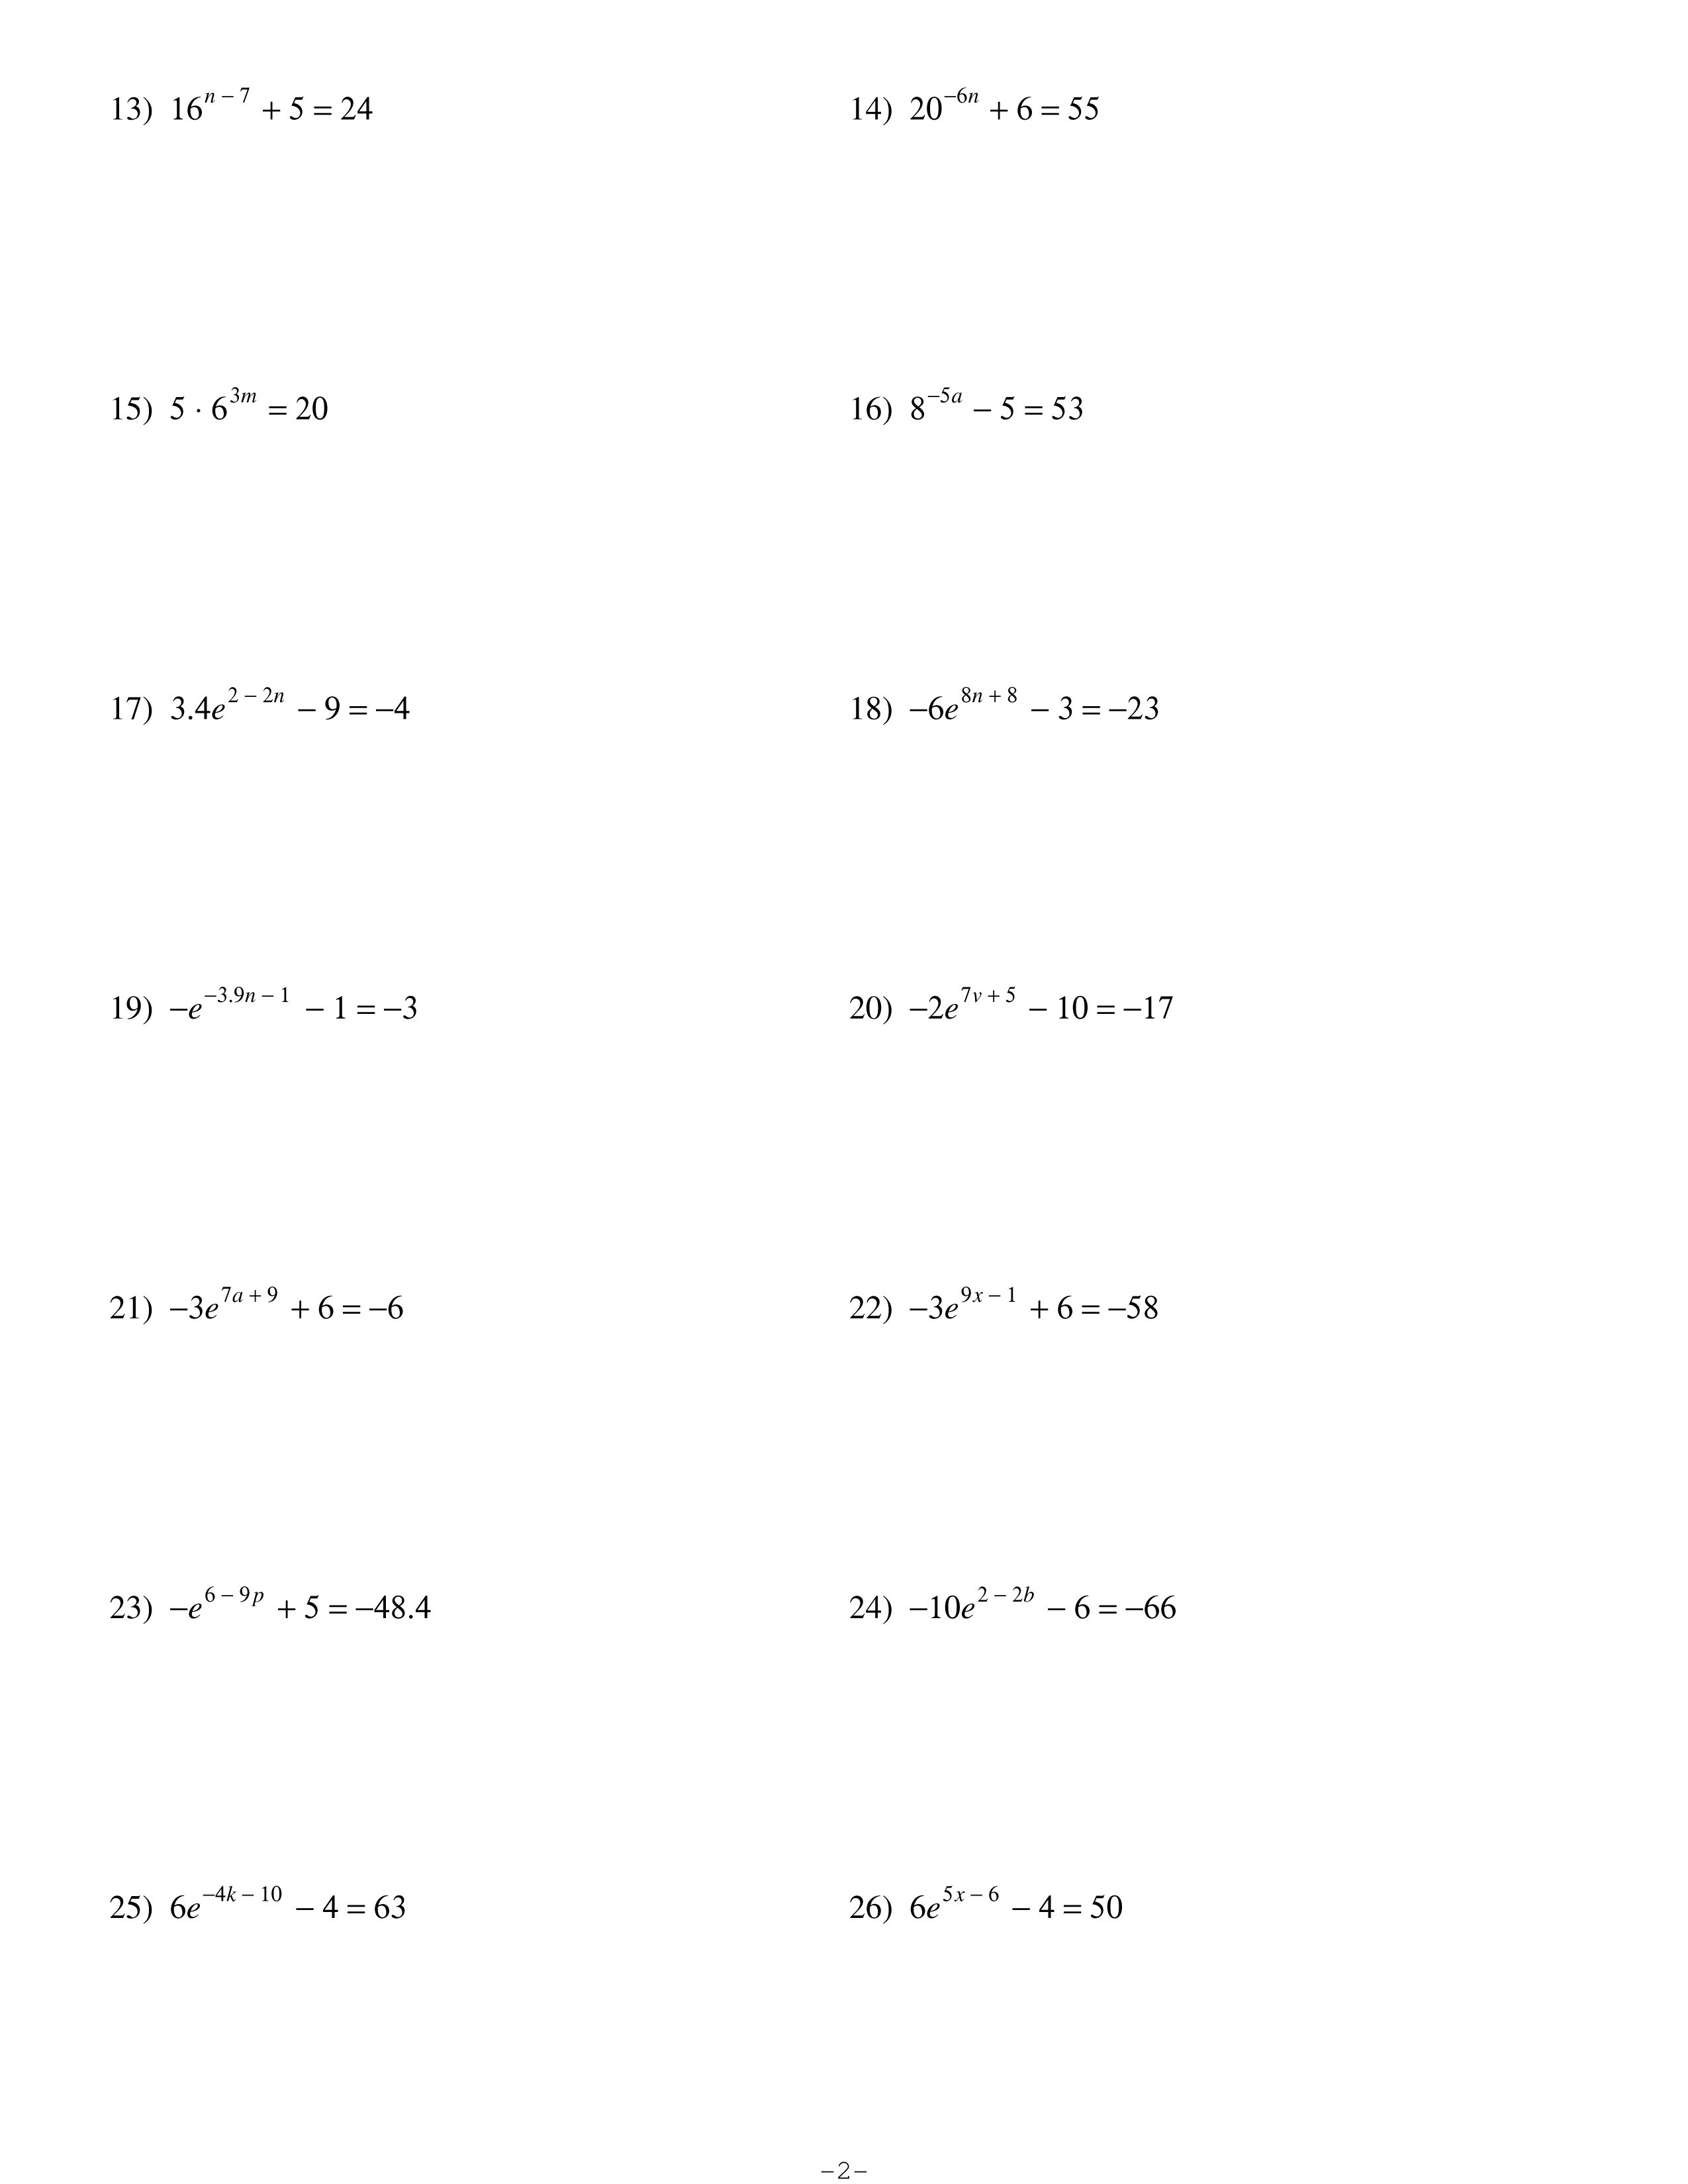 Hw Solving Exponential Equations With Logarithms  Algebra Ii As Well As Solving Exponential Equations With Logarithms Worksheet